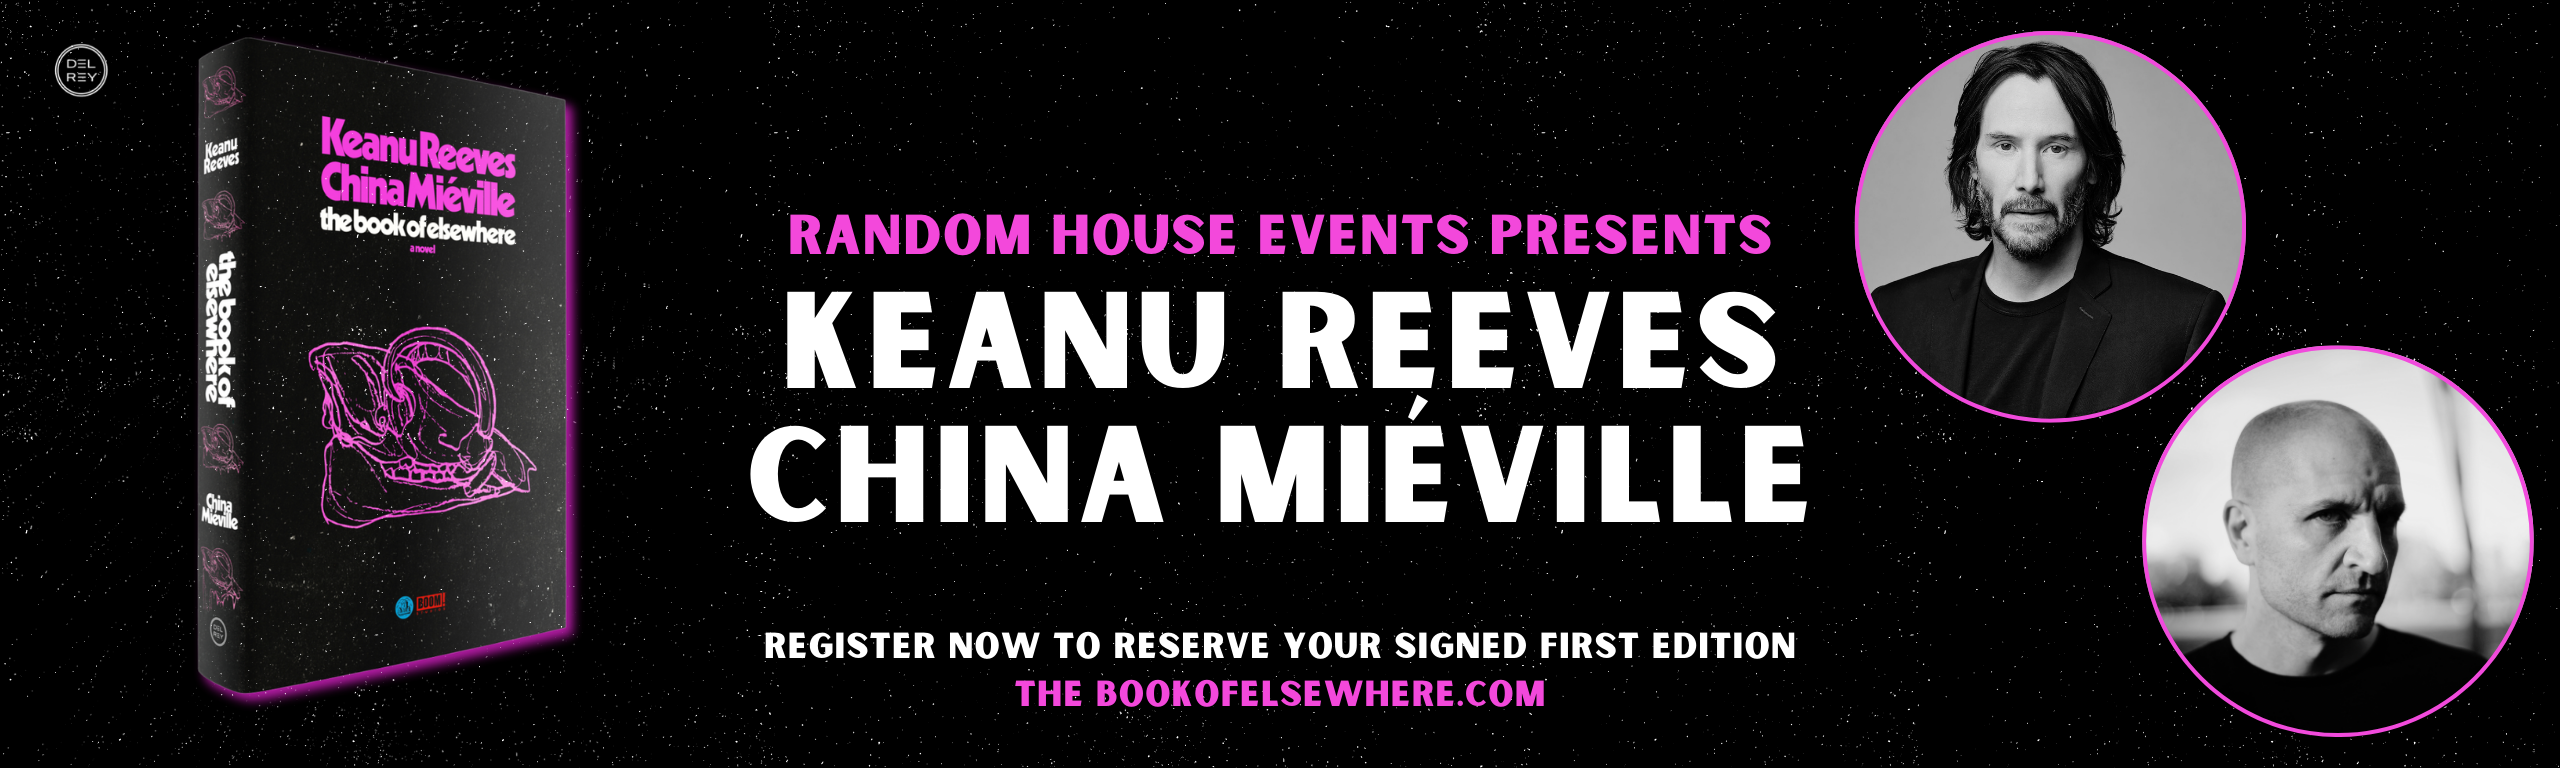 A Virtual Conversation with Keanu Reeves and China Miéville